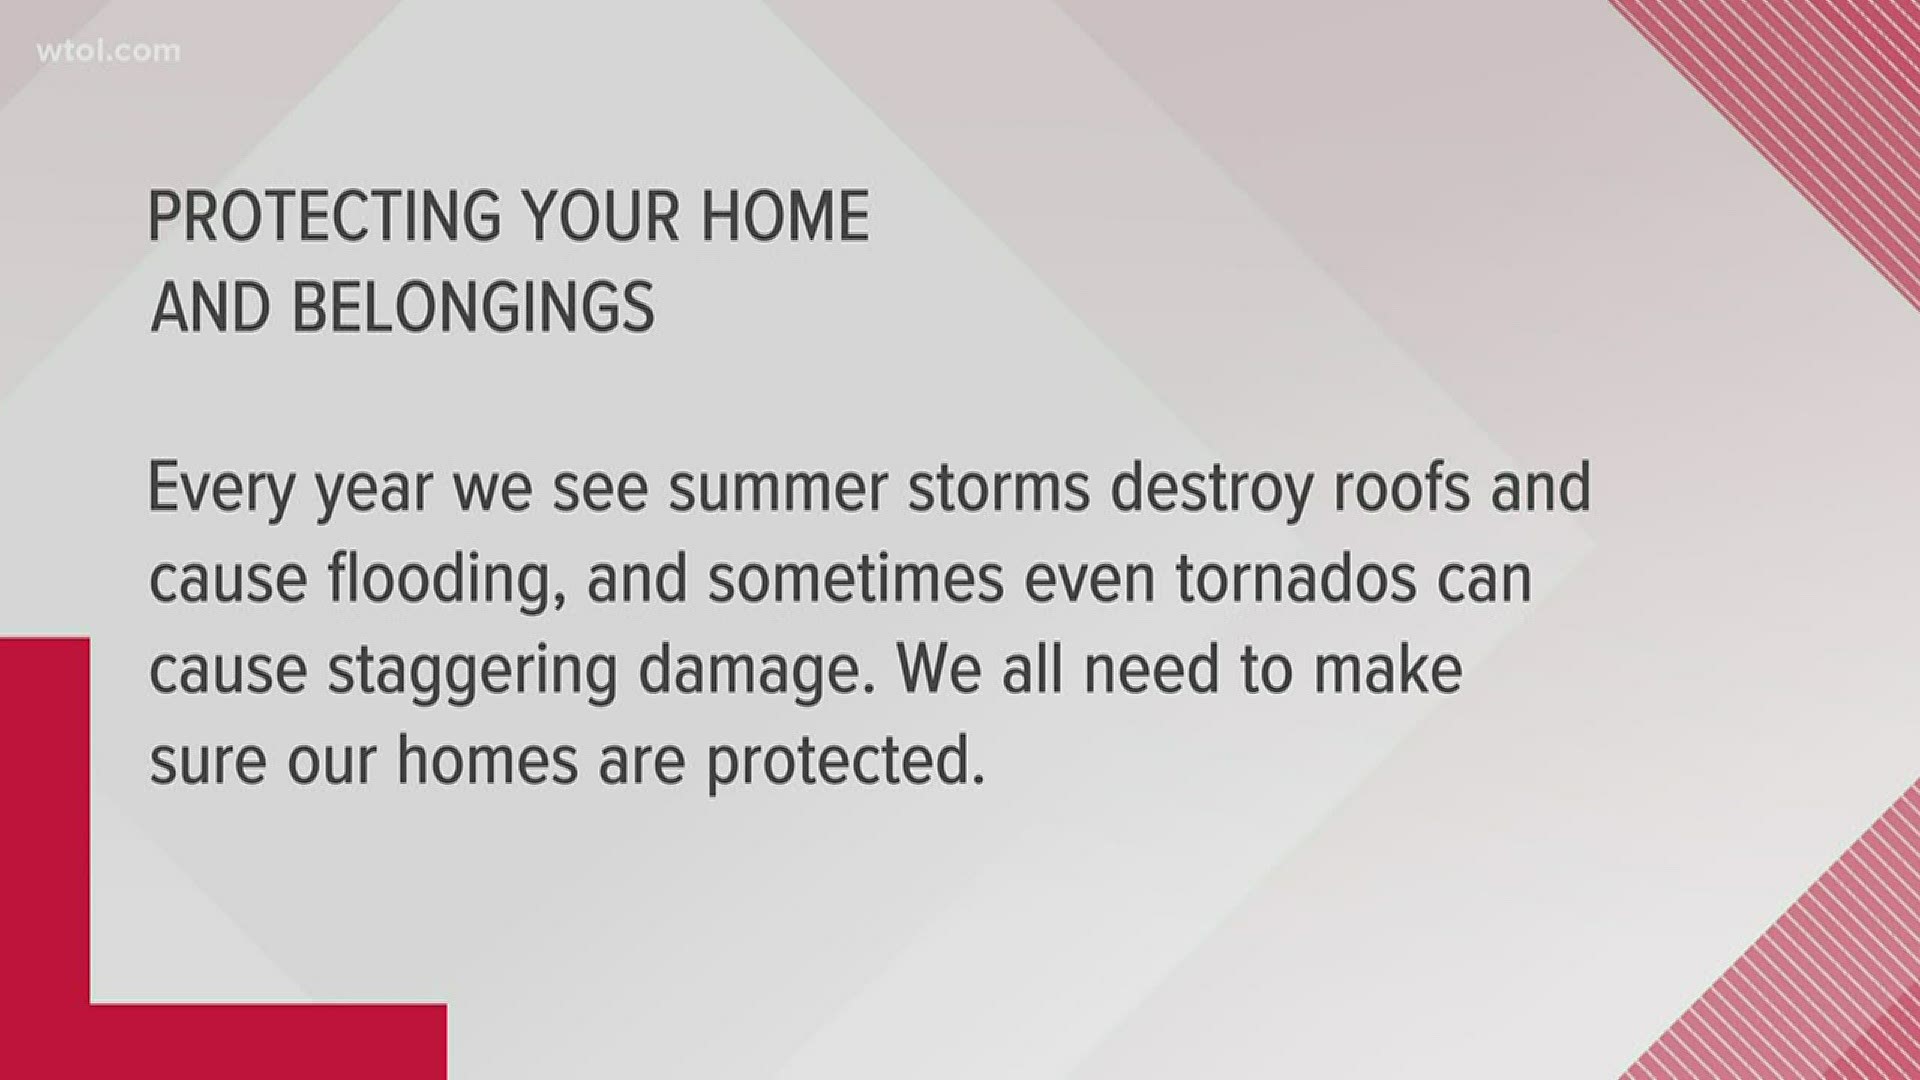 Sadly, disasters such as tornadoes and flooding can affect your home. The BBB says to be careful who you trust when it comes to protecting yourself and your home.